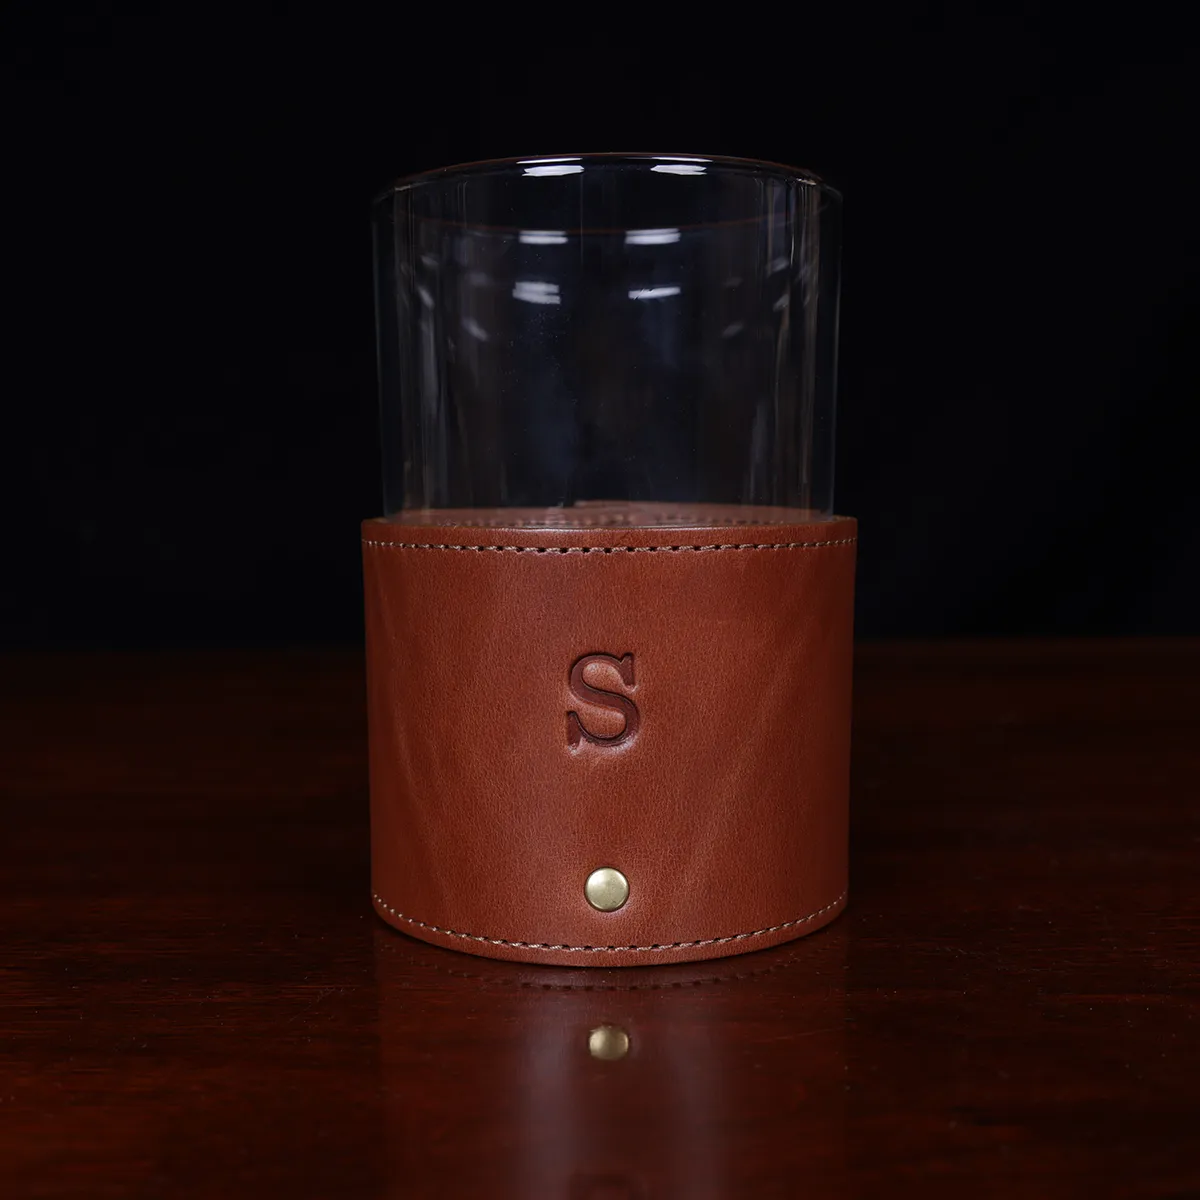 leather veranda glass sleeve and glass on wooden table with dark background